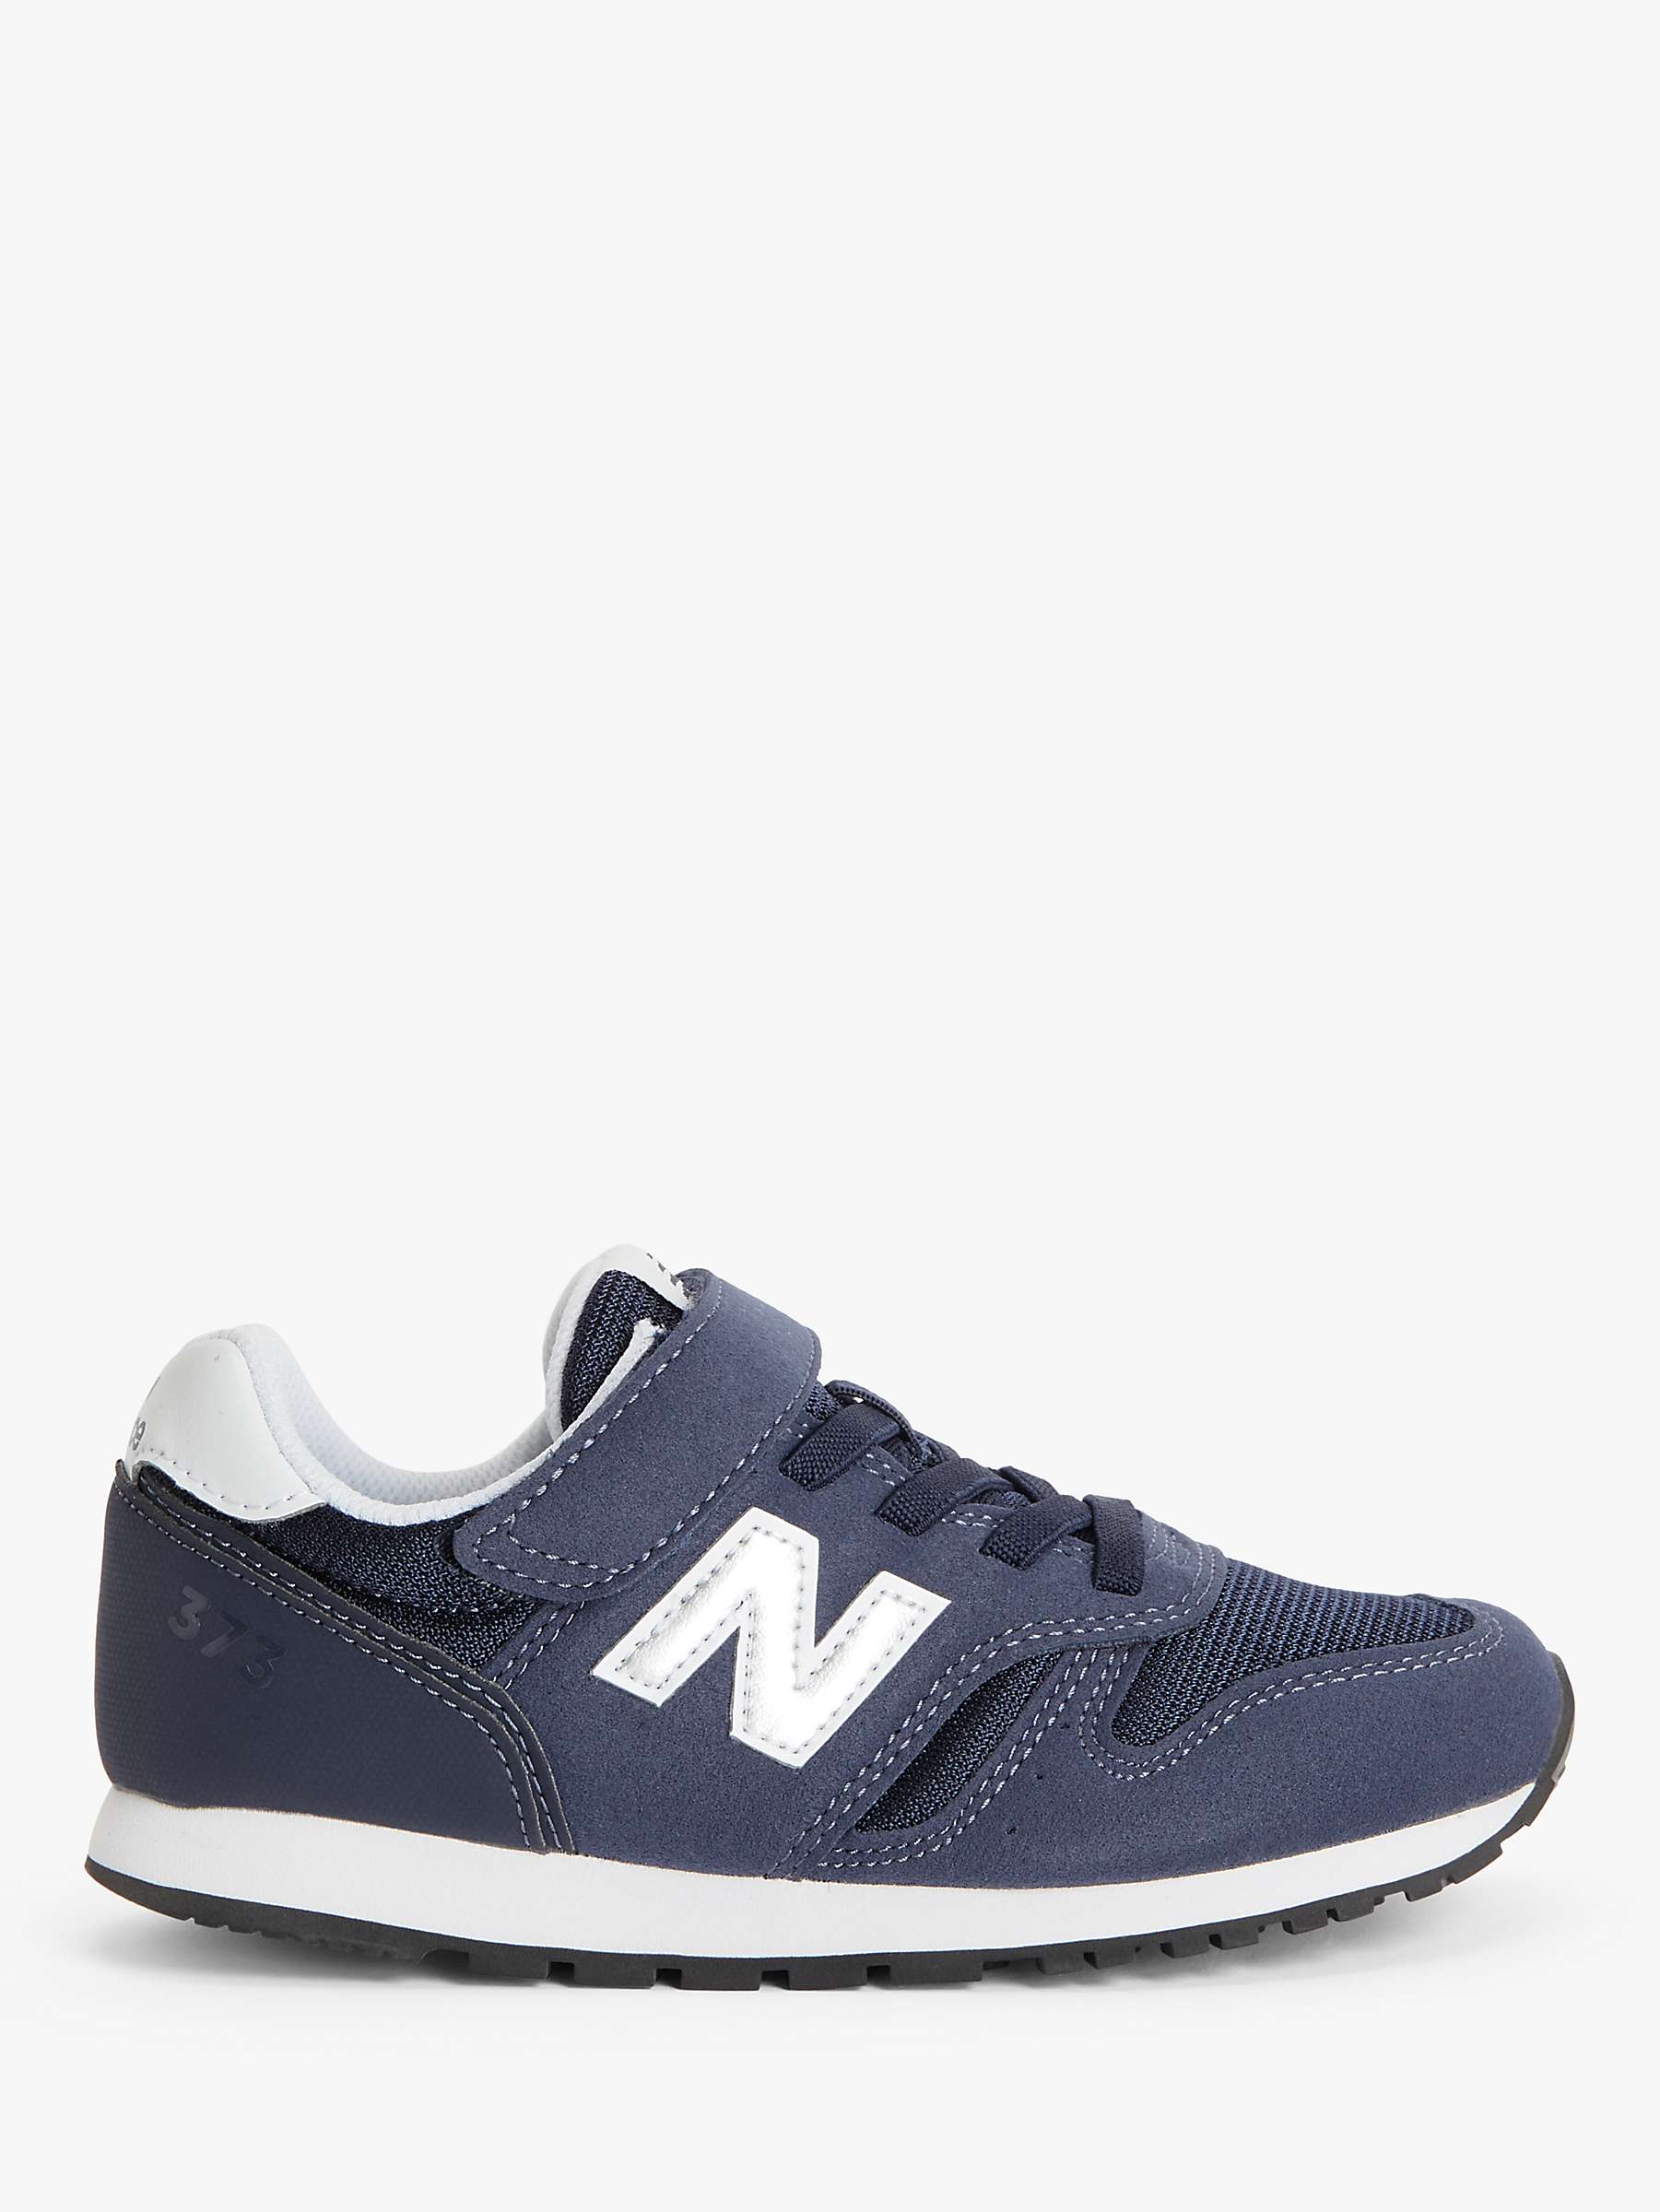 Buy New Balance Kids' 373 Bungee Lace with Velcro Top Strap Trainers Online at johnlewis.com